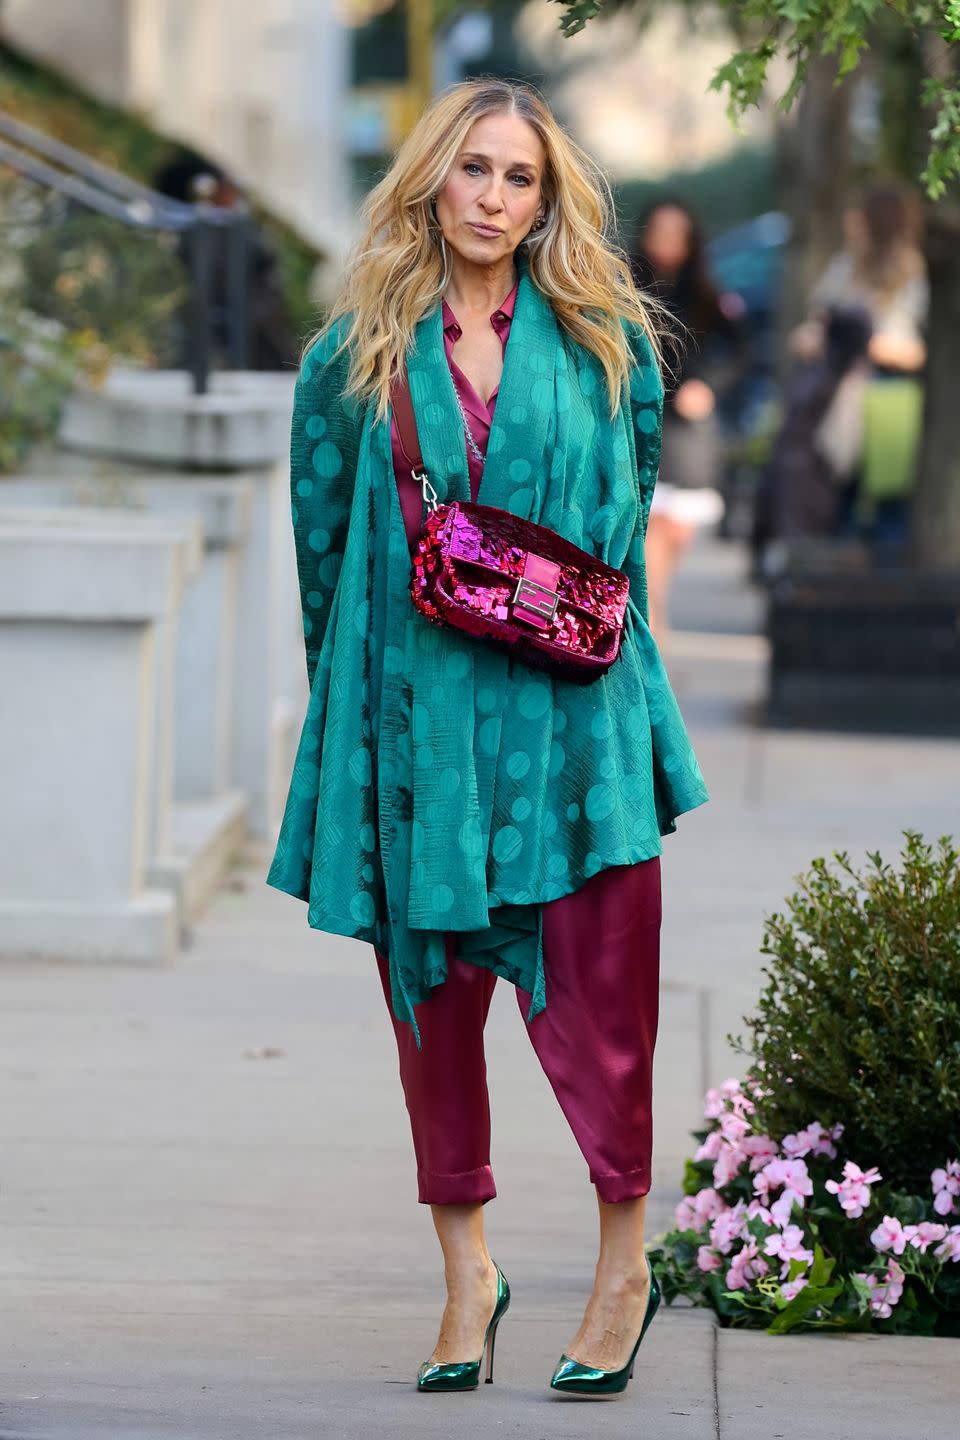 new york, ny january 09 sarah jessica parker is seen at the film set of the and just like that tv series on january 09, 2023 in new york city photo by jose perezbauer griffingc images